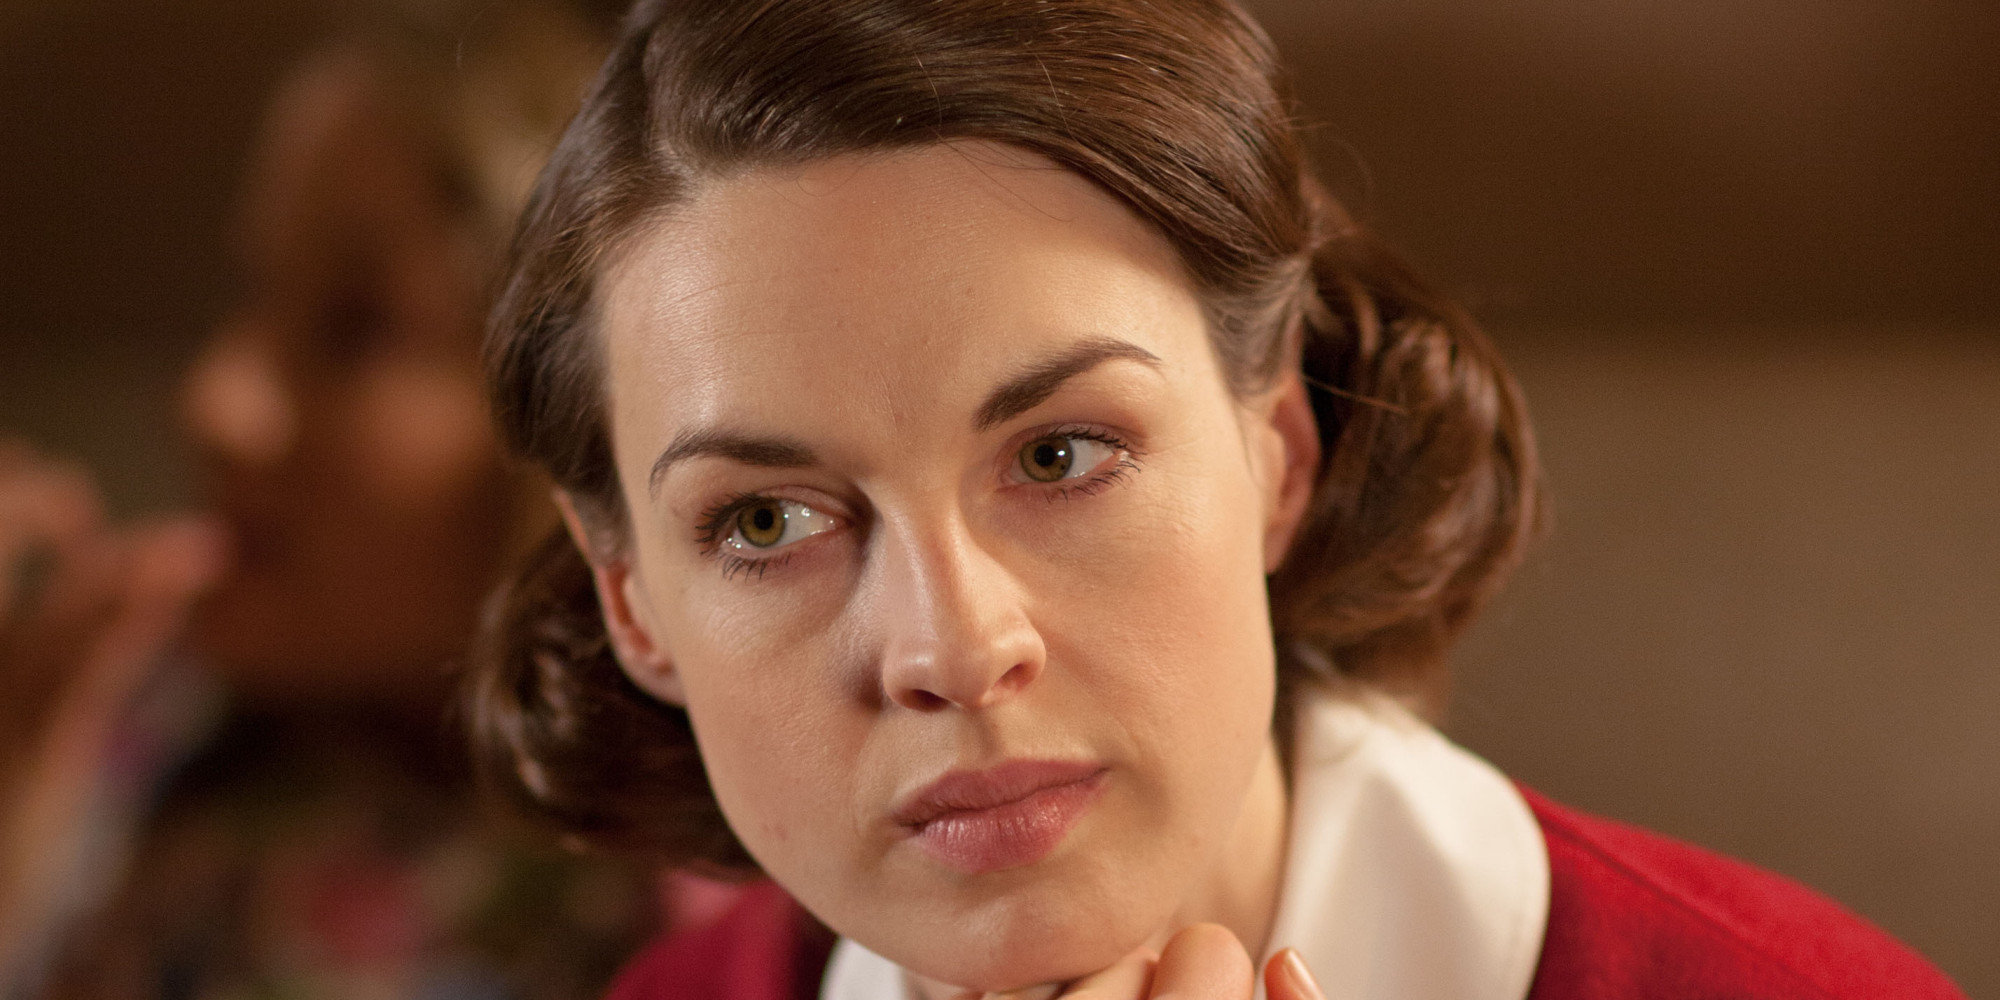 Call The Midwife Final Episode Series 3 Review Can The Bbc Find